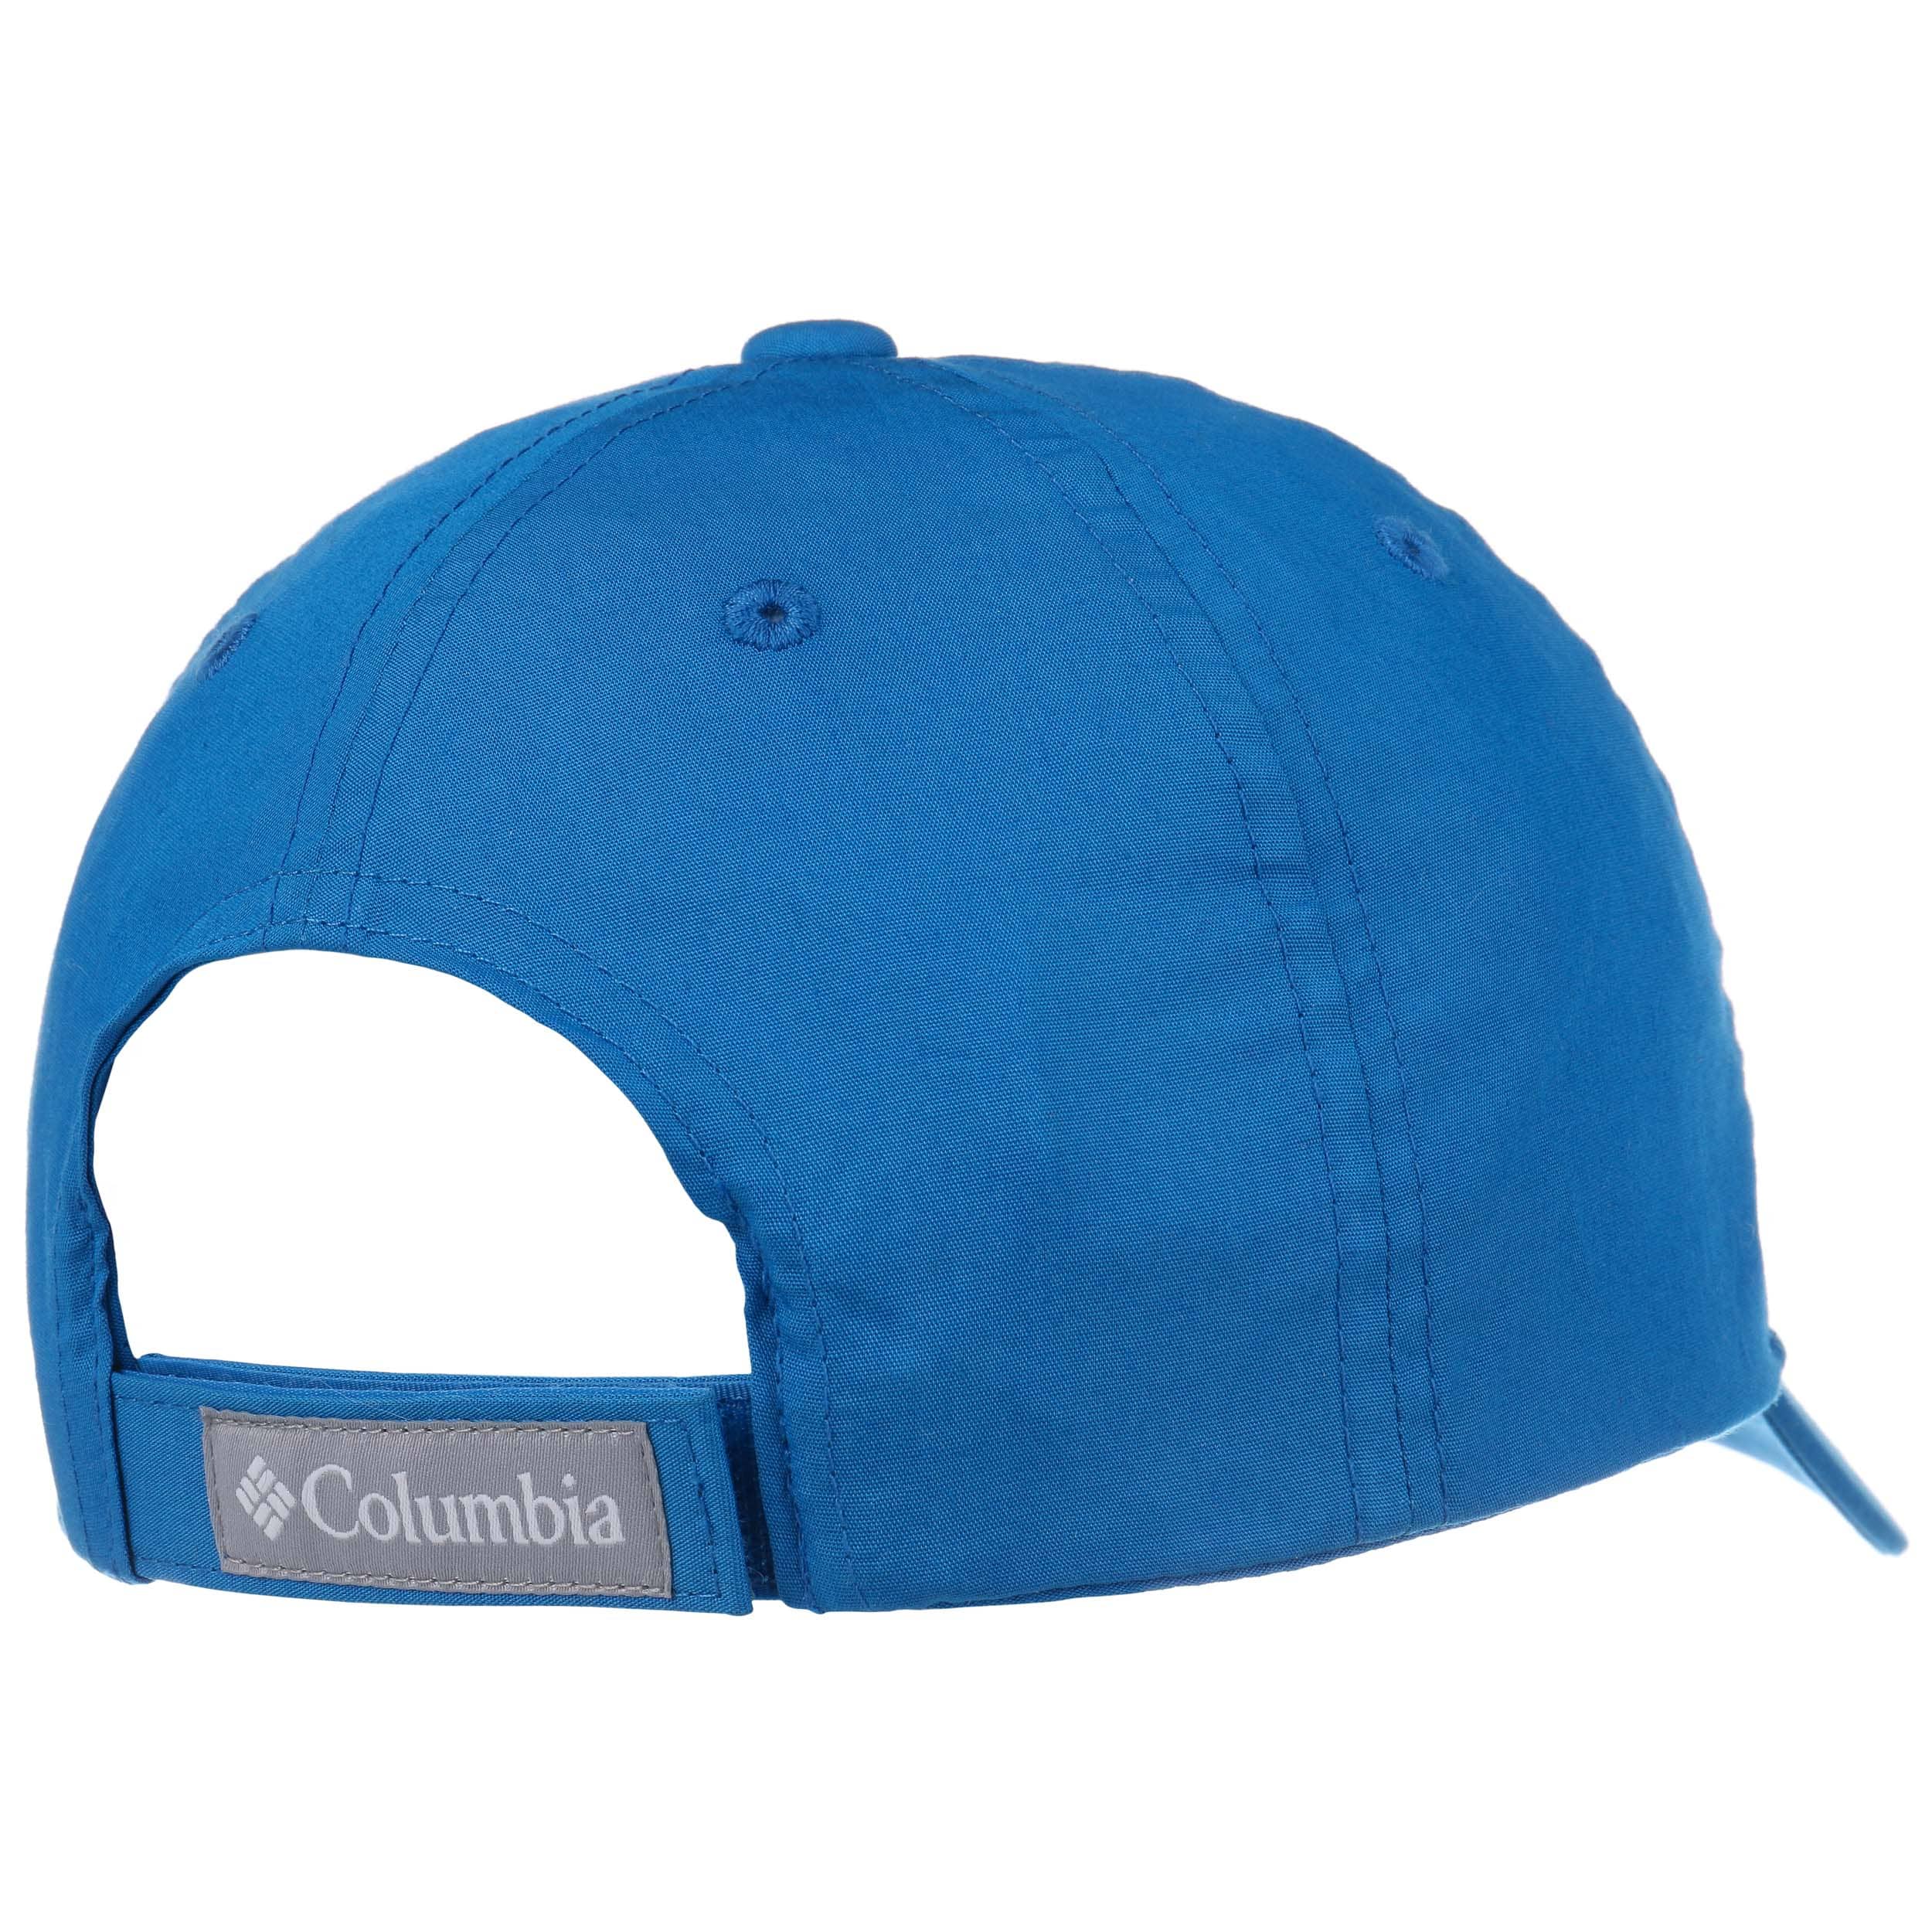 Youth Baseball Cap by Columbia - 21,95